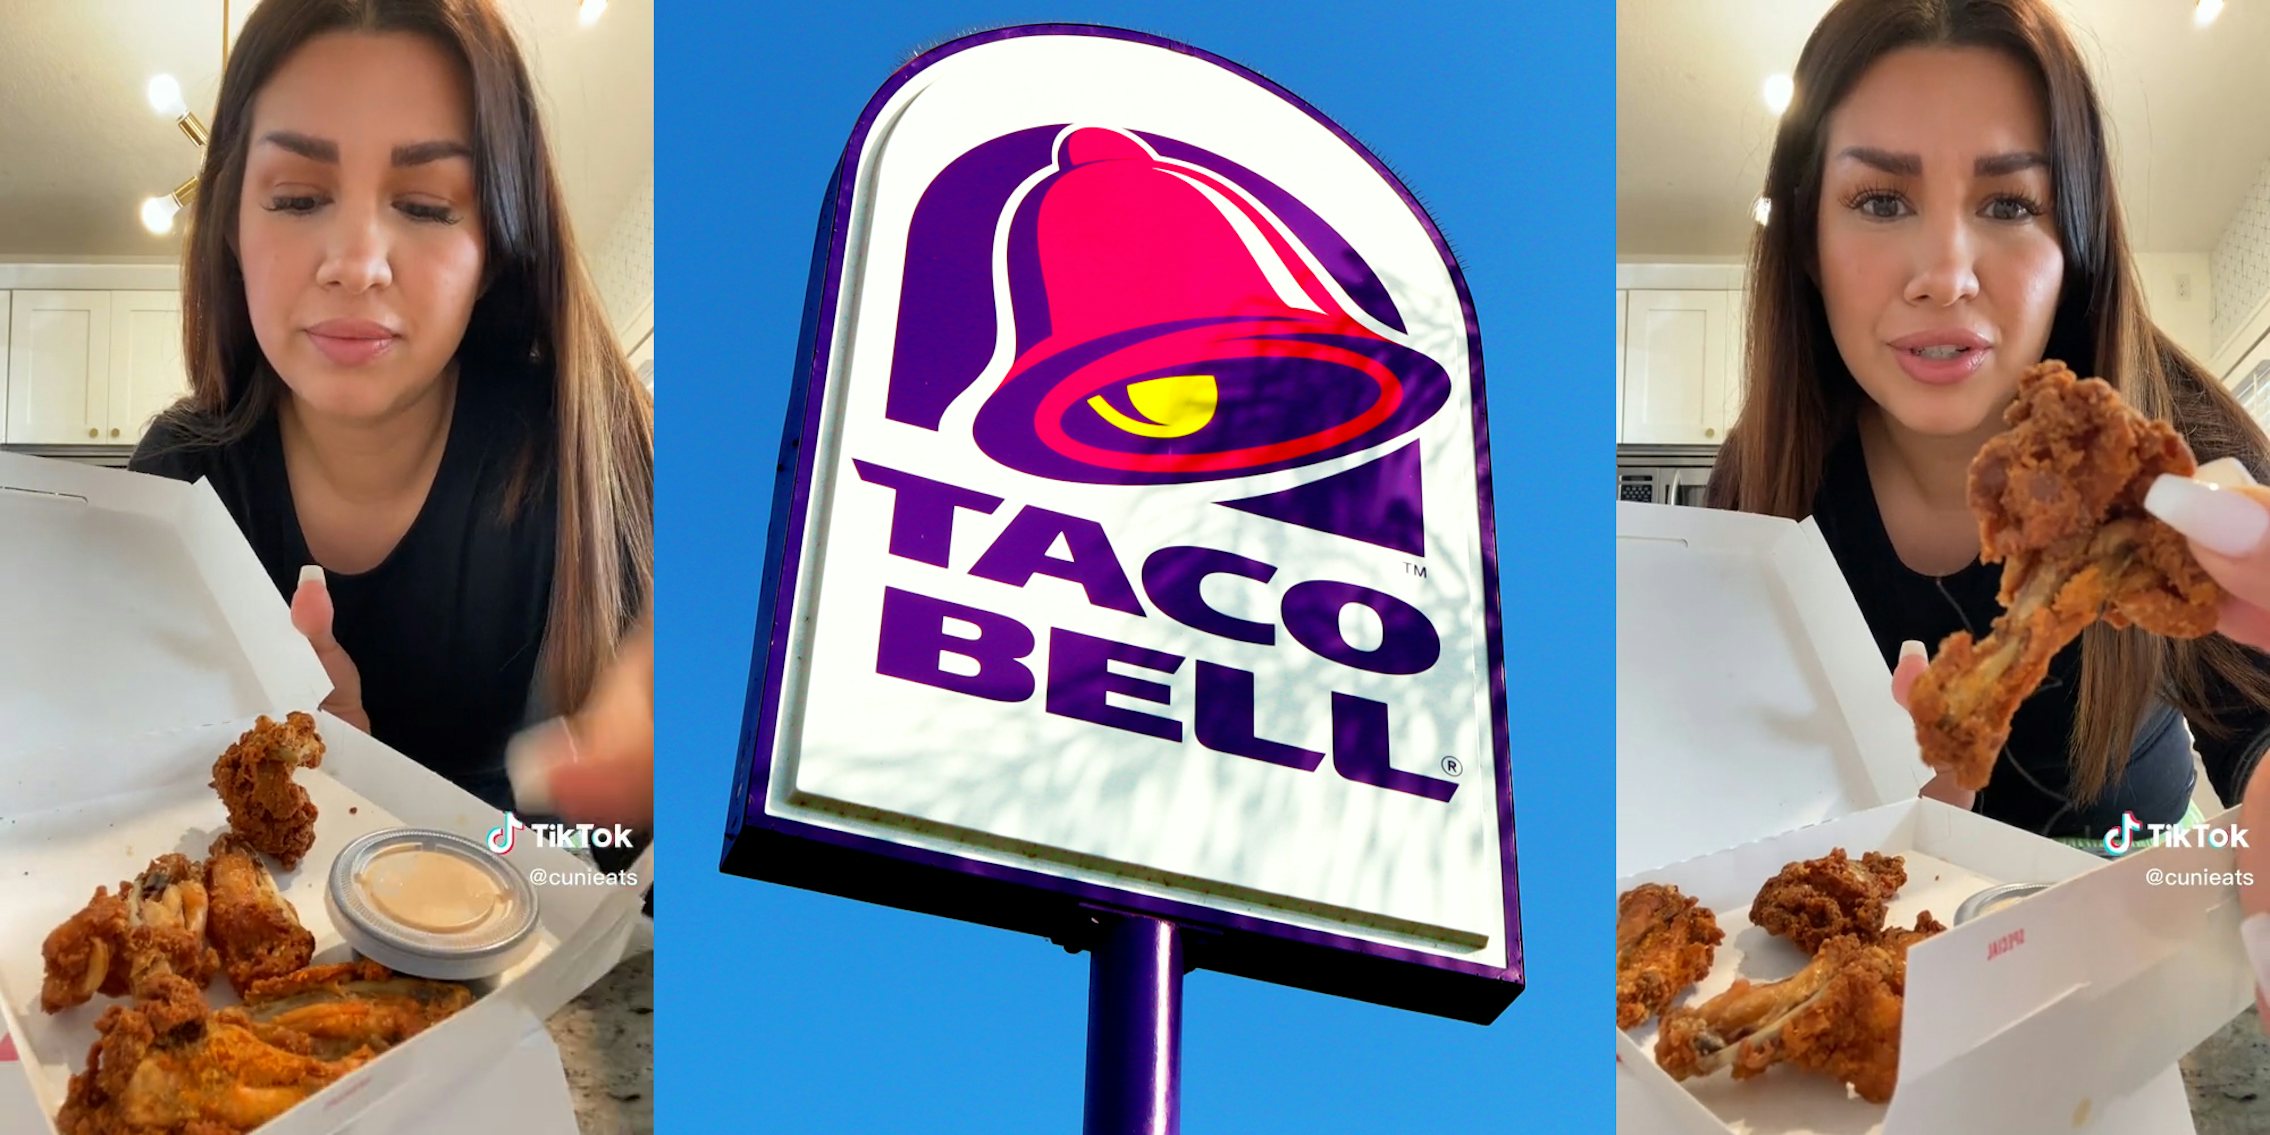 woman showing Taco Bell wings